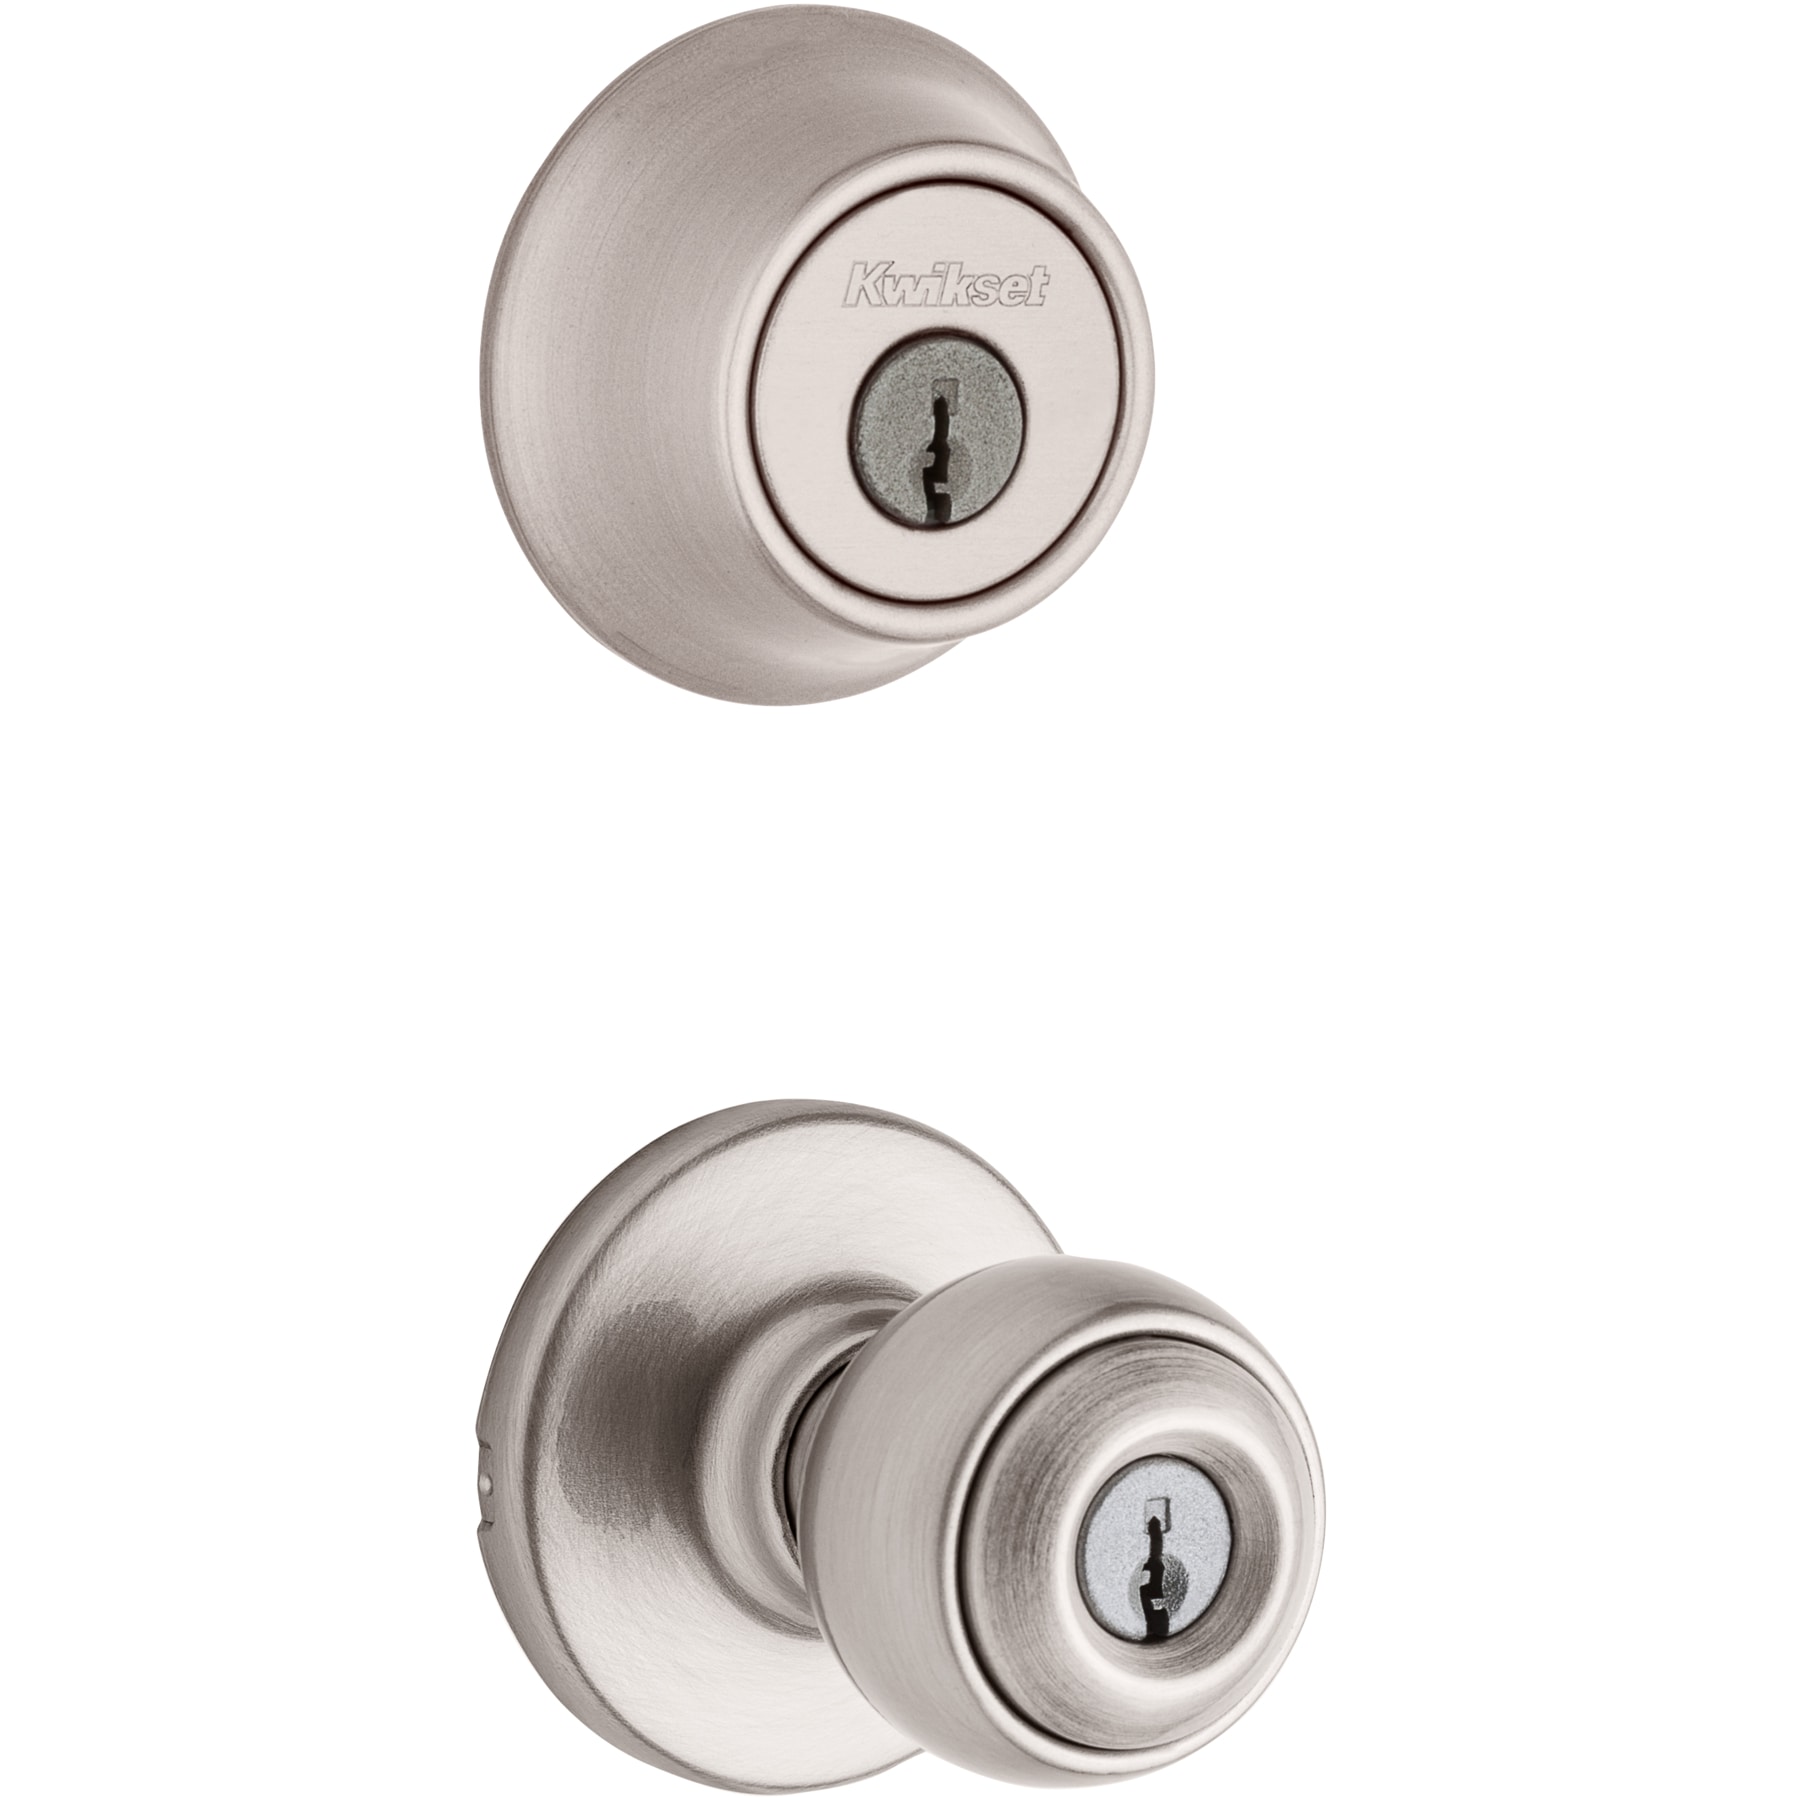 Kwikset Series Polo Satin Nickel Exterior Single-cylinder deadbolt Keyed Entry  Door Knob Combo Pack with Antimicrobial Technology in the Door Knobs  department at